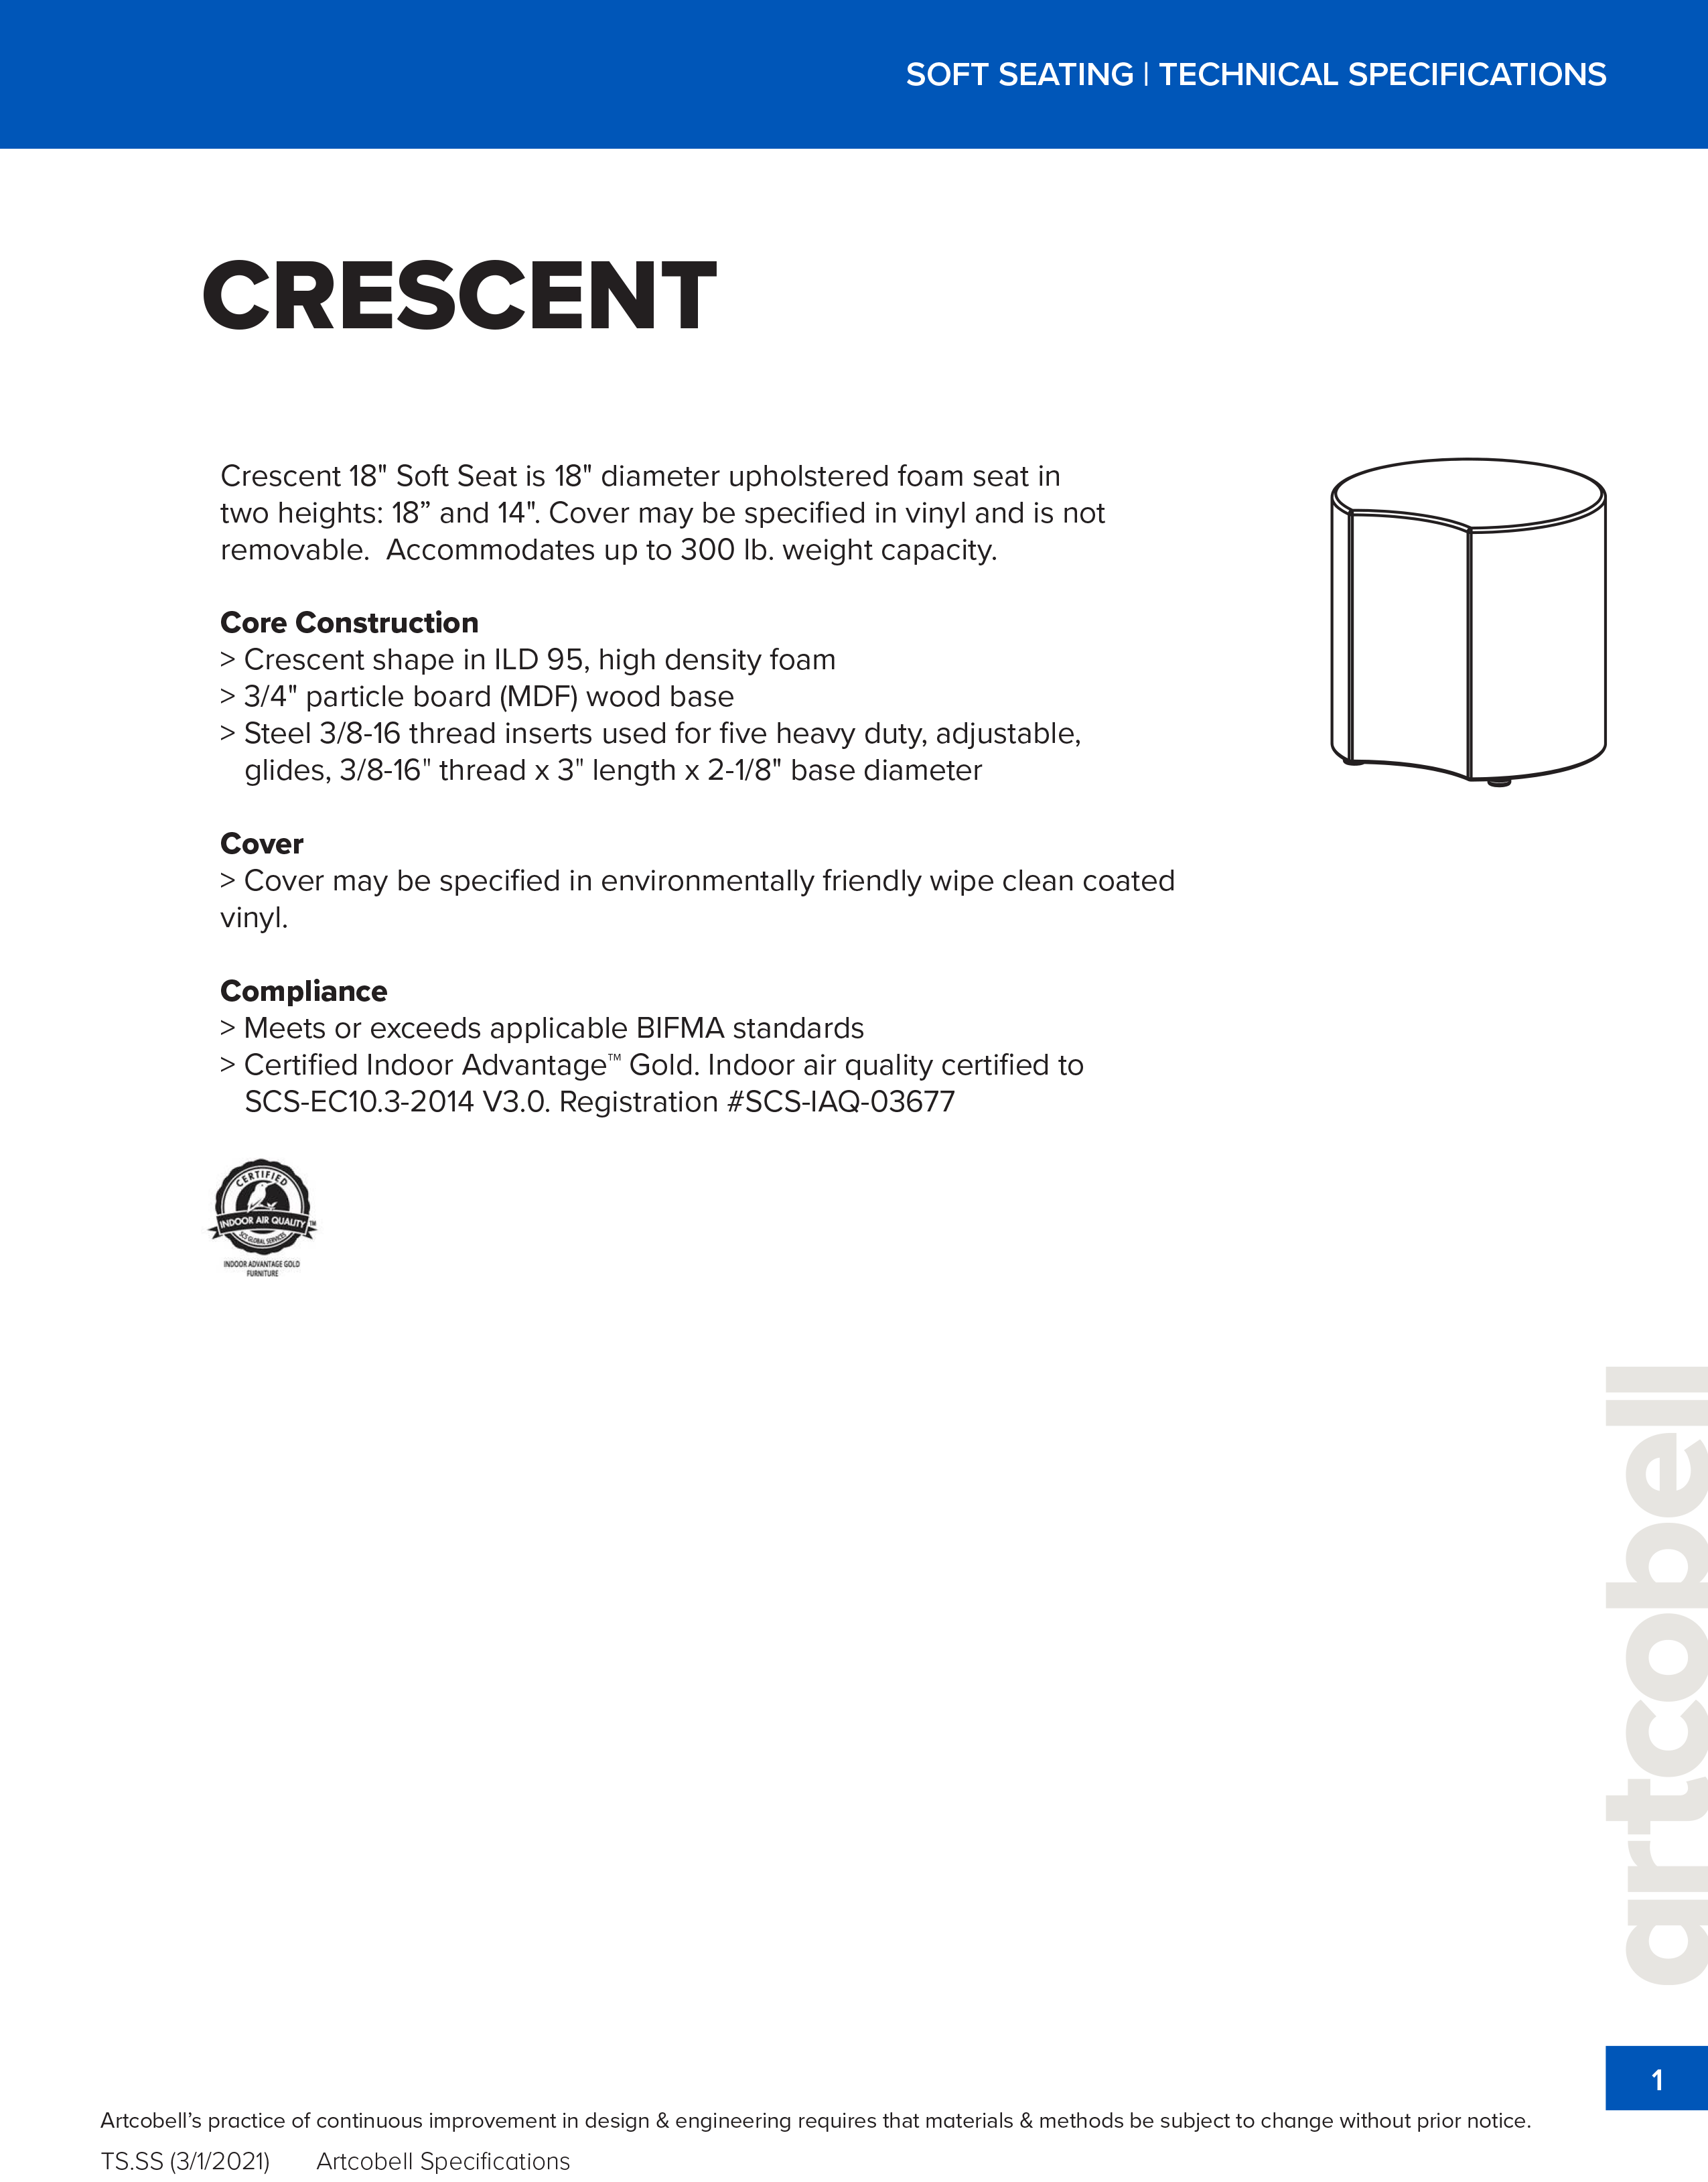 SoftSeatingSpecifications_Crescent